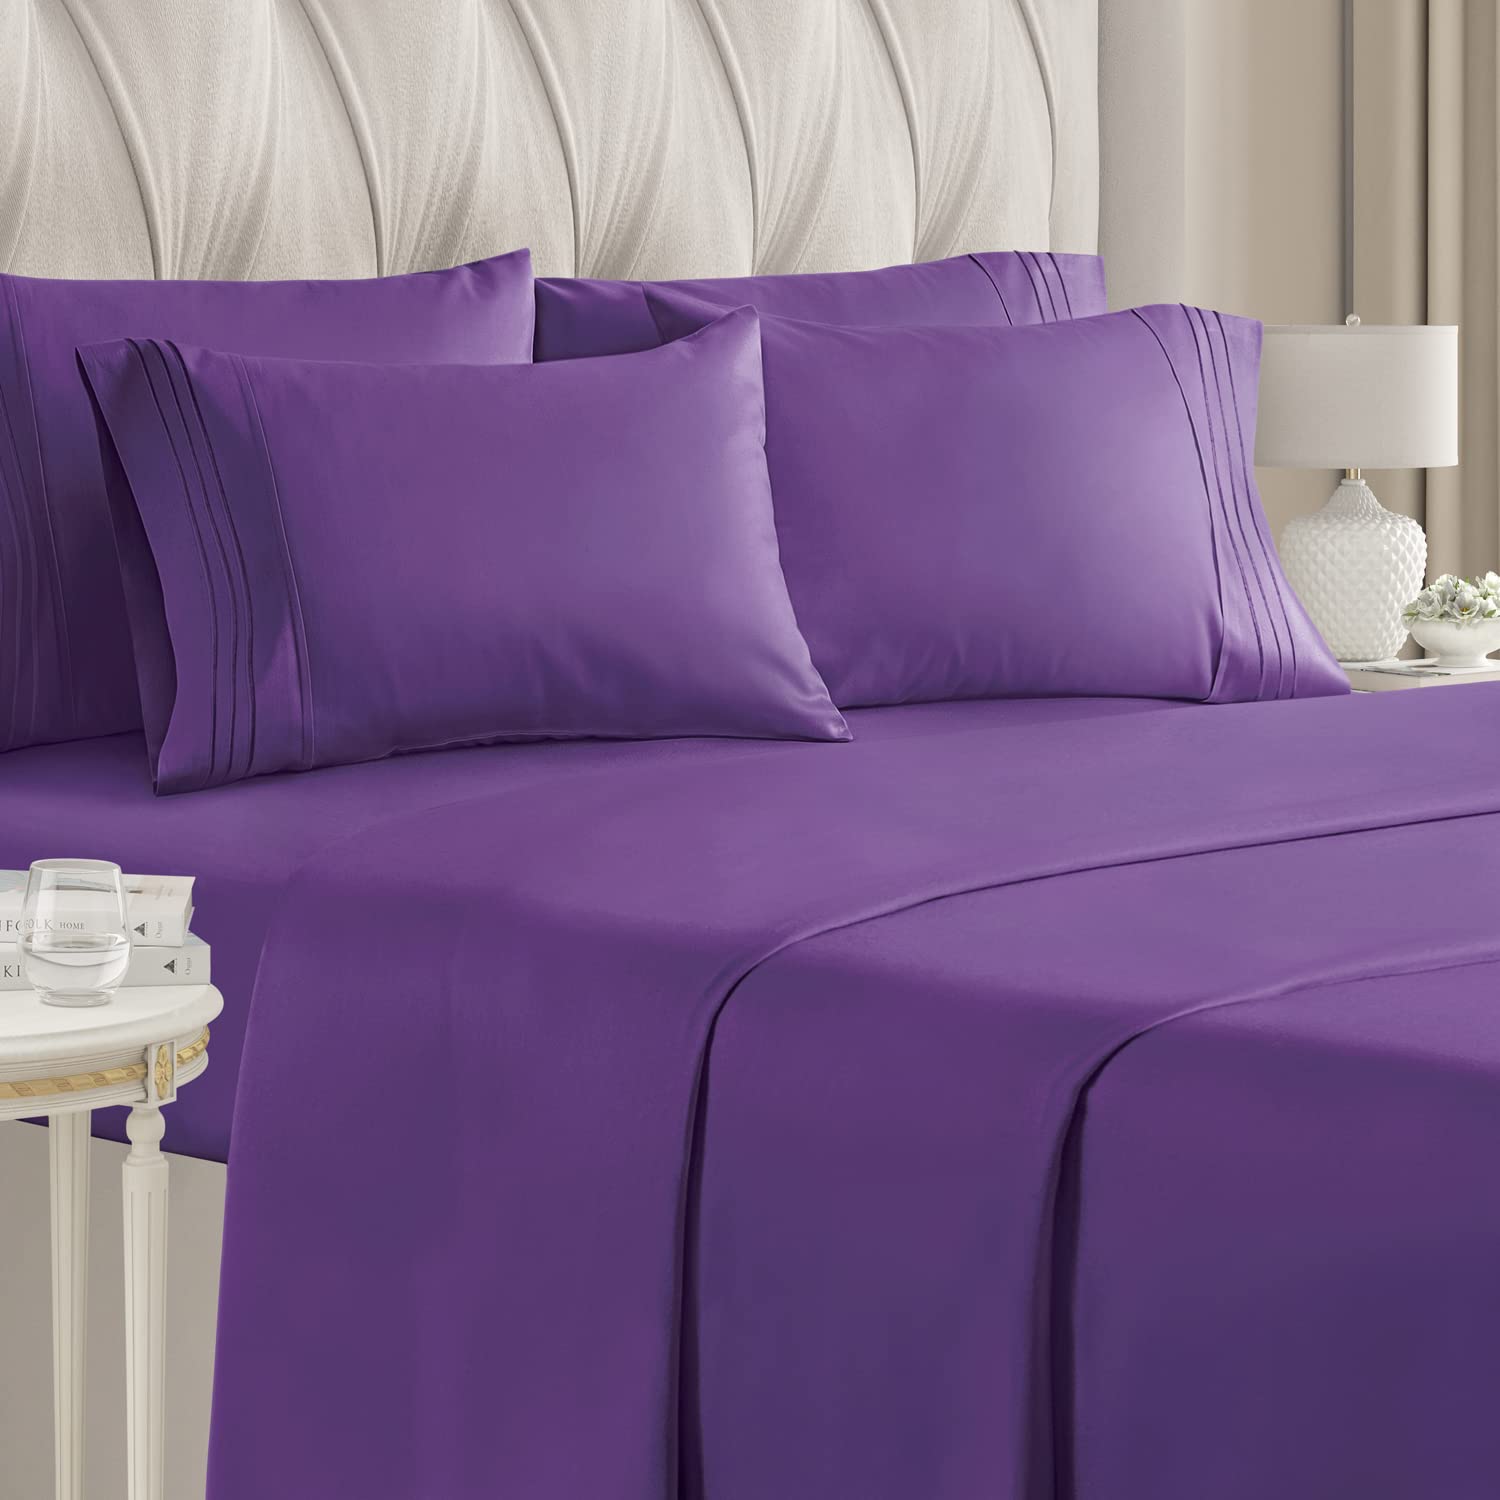 Book Cover Full Size Sheet Set - 6 Piece Set - Hotel Luxury Bed Sheets - Extra Soft - Deep Pockets - Easy Fit - Breathable & Cooling Sheets - Wrinkle Free - Comfy - Purple Plum Bed Sheets - Fulls Sheets - 6 PC 08 - Purple Full